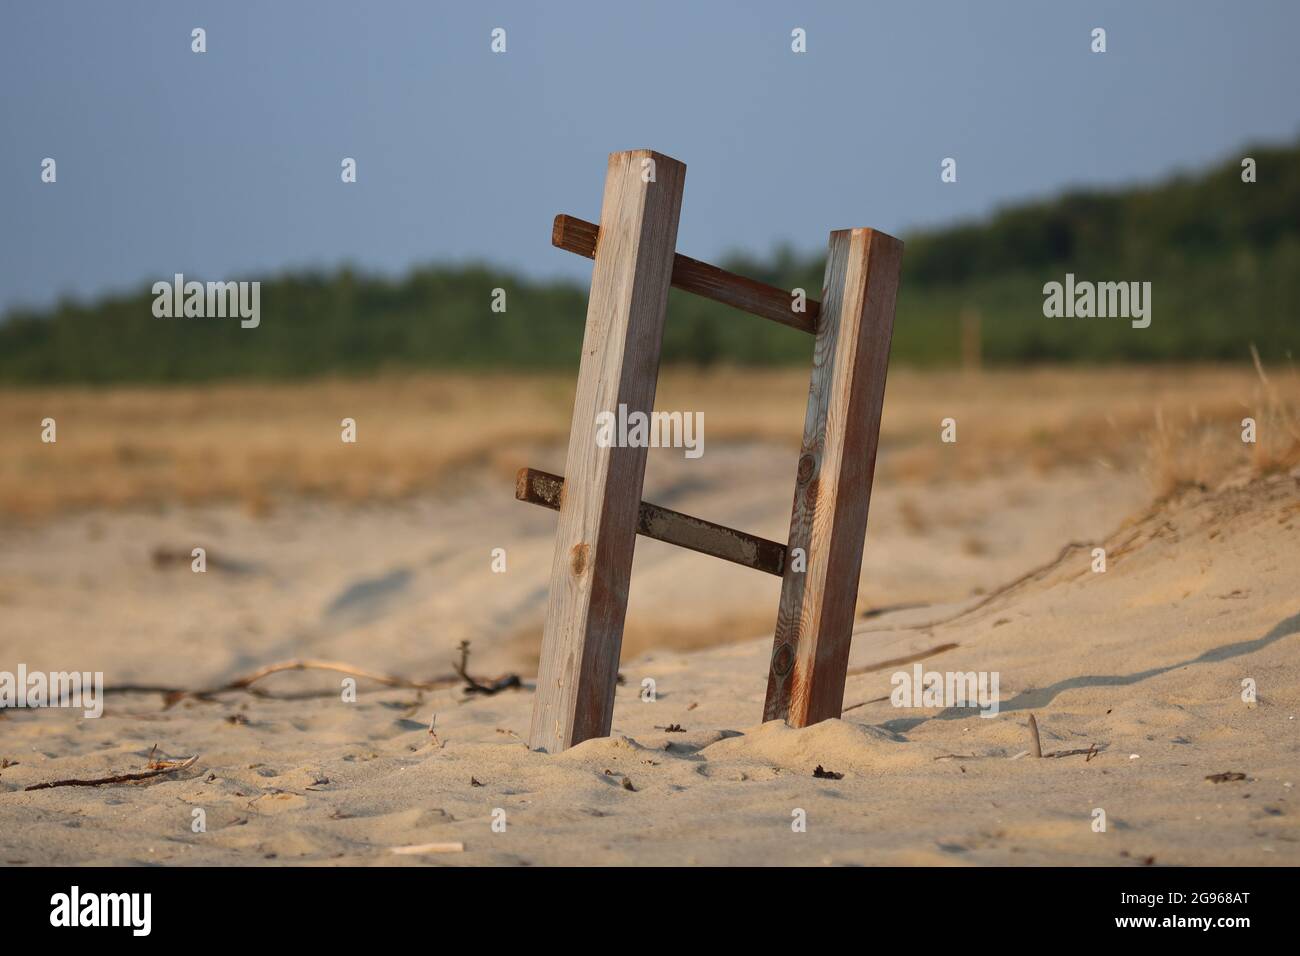 Sandy arid dried area, abandoned wooden ladder, Bledowska Desert in Poland, desrtification of the Eart, climate changing. Stock Photo